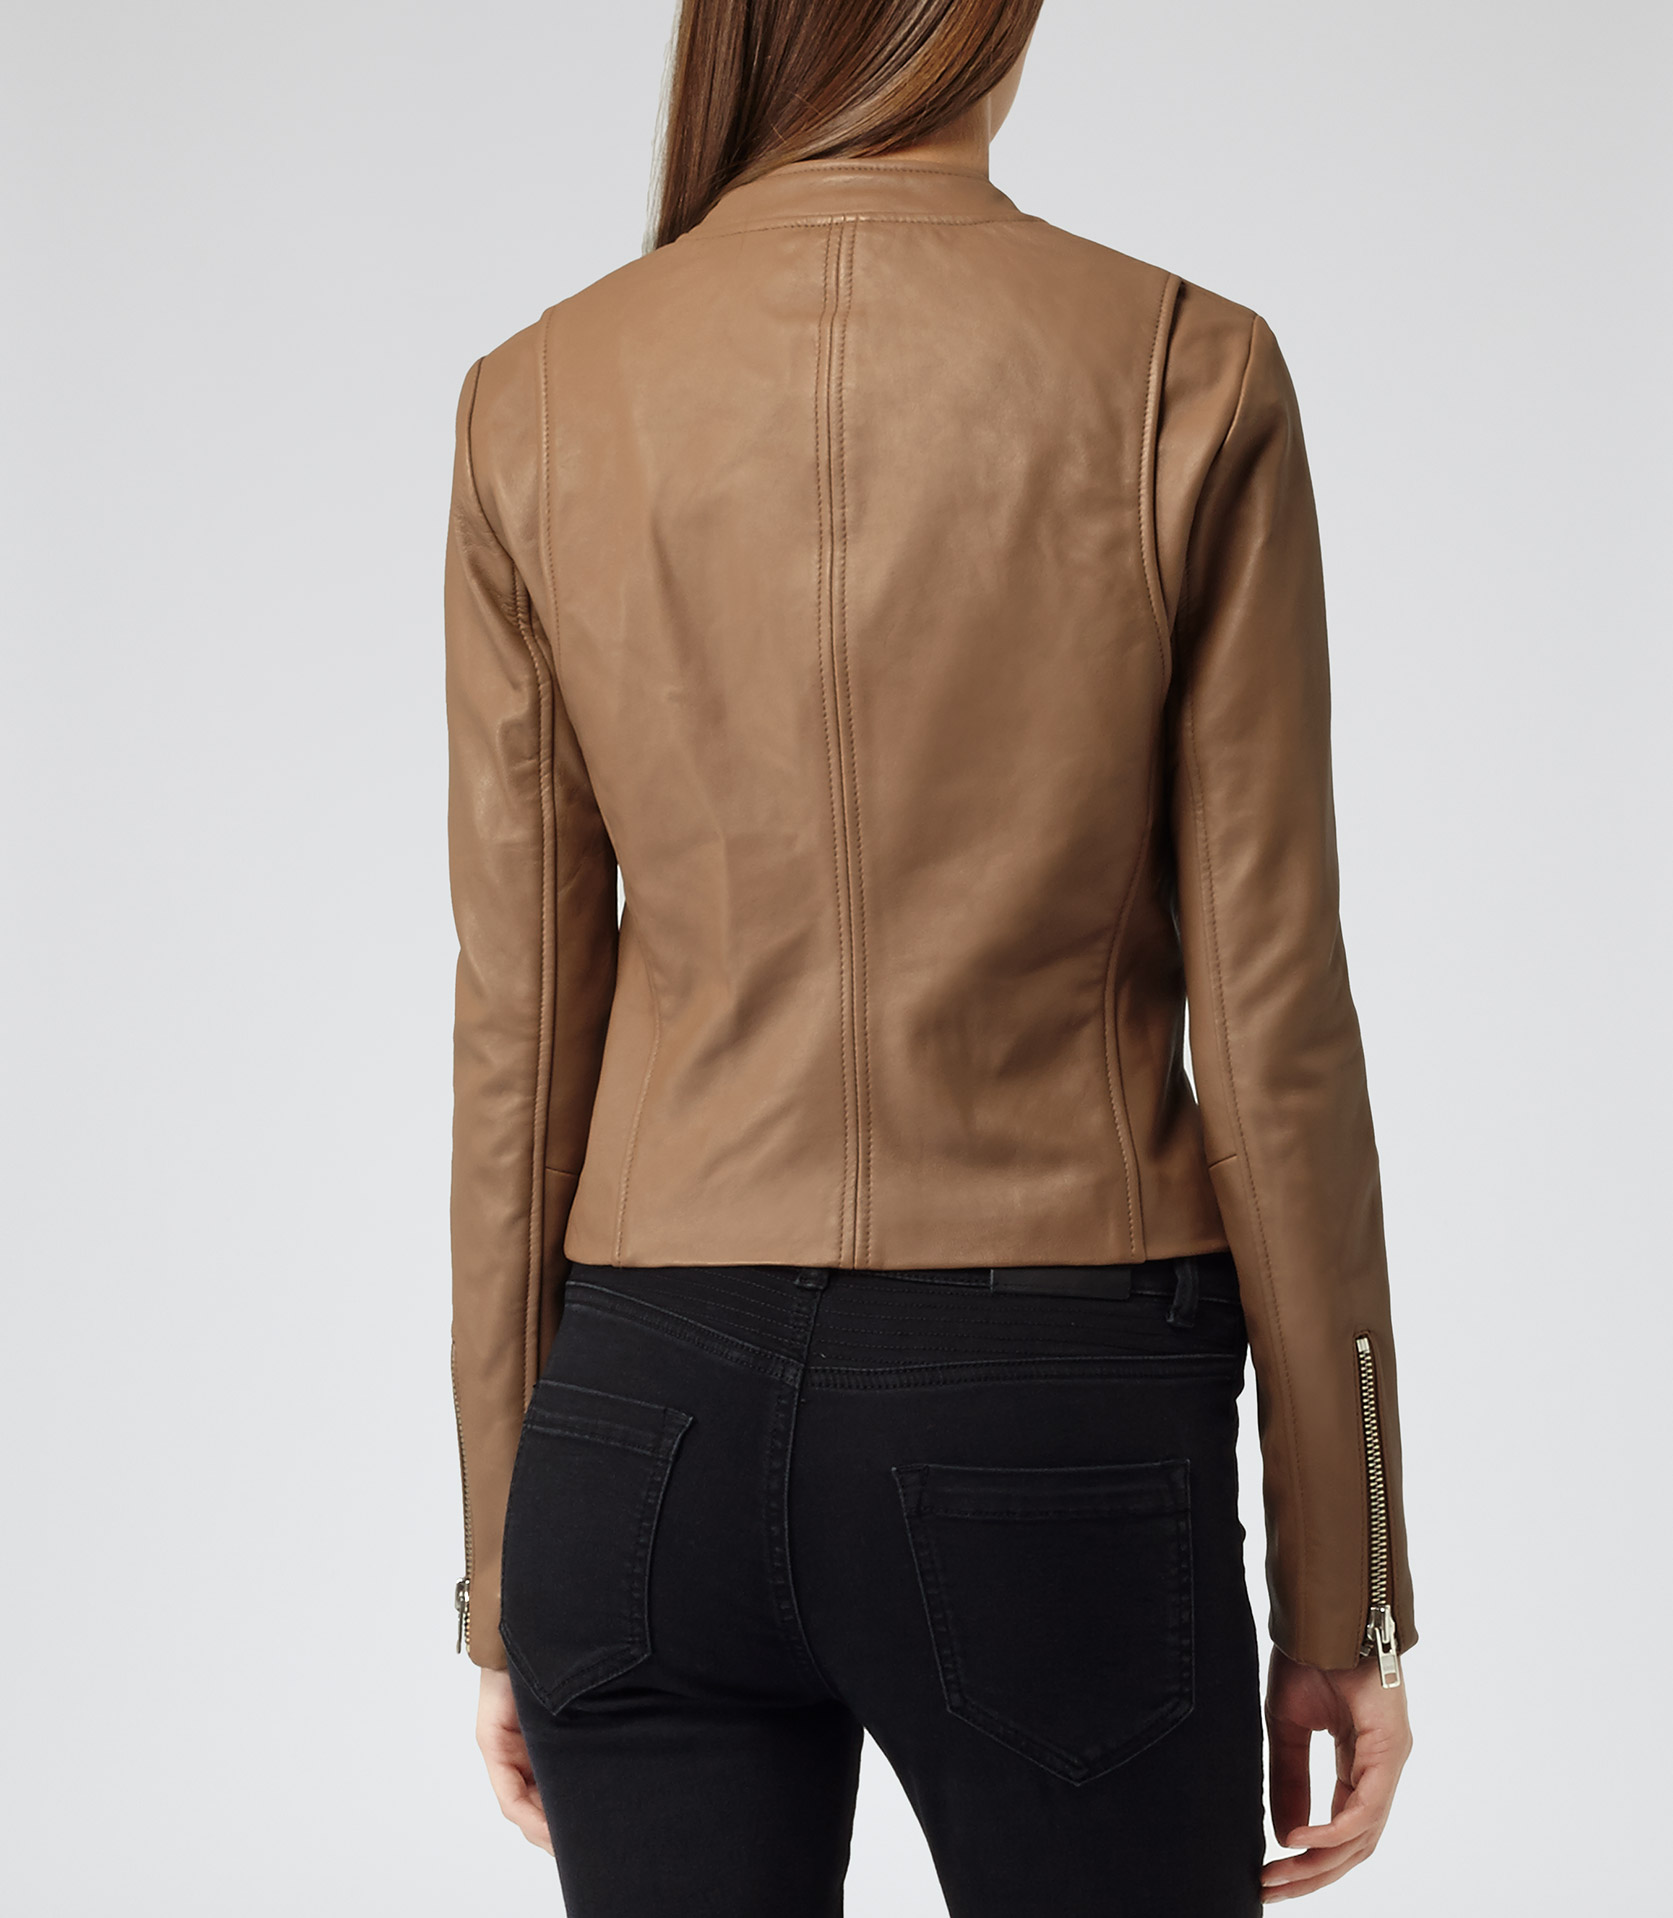 Reiss Opal Collarless Leather Jacket in Tan (Brown) - Lyst